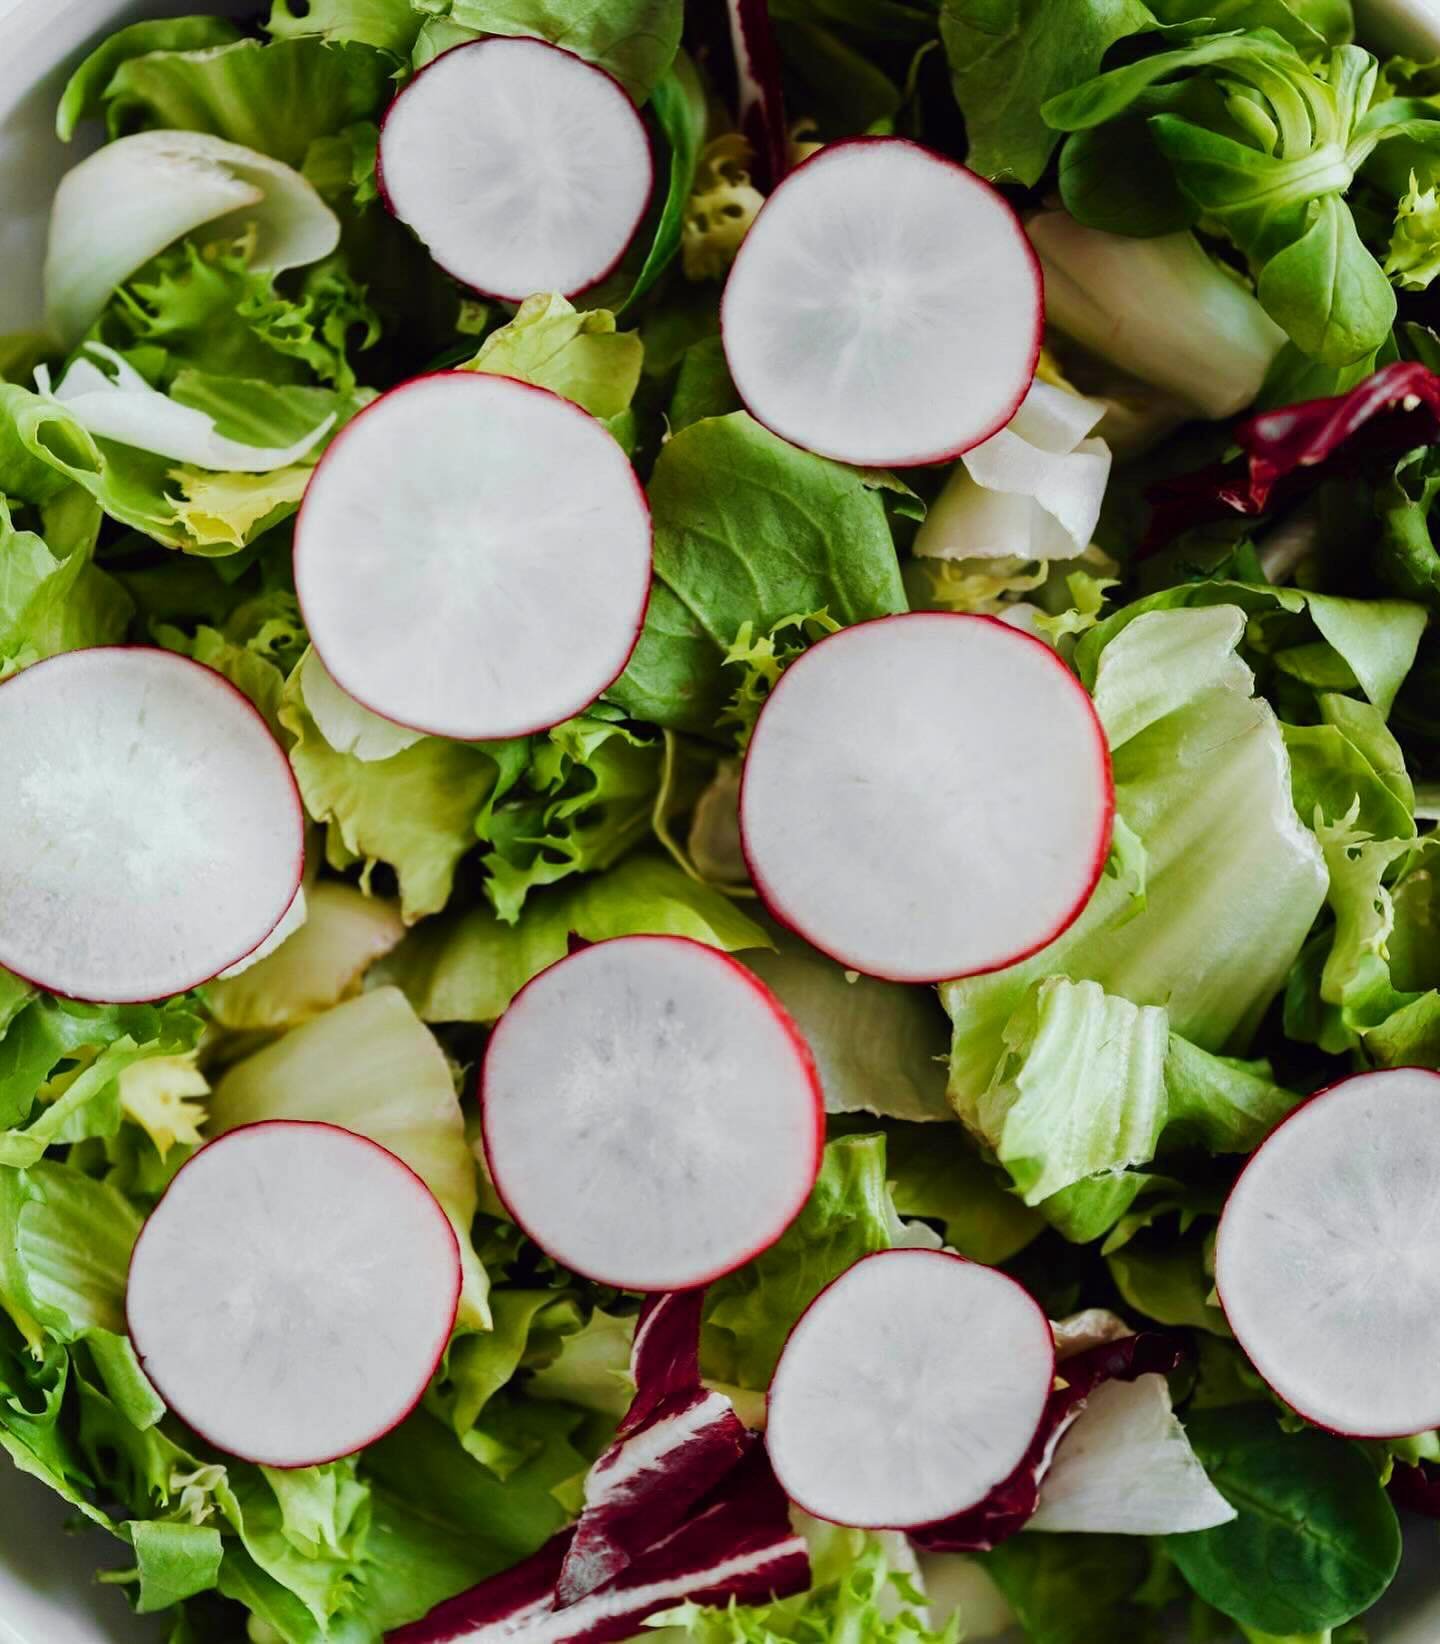 Power Up Your Plate 🥗

Today, we&rsquo;re spotlighting the superstar of the veggie world: leafy greens! Leafy greens are packed with essential vitamins, minerals, and fibre that fuel your body for optimal performance 🚀

✅Benefits of a Daily Dose of